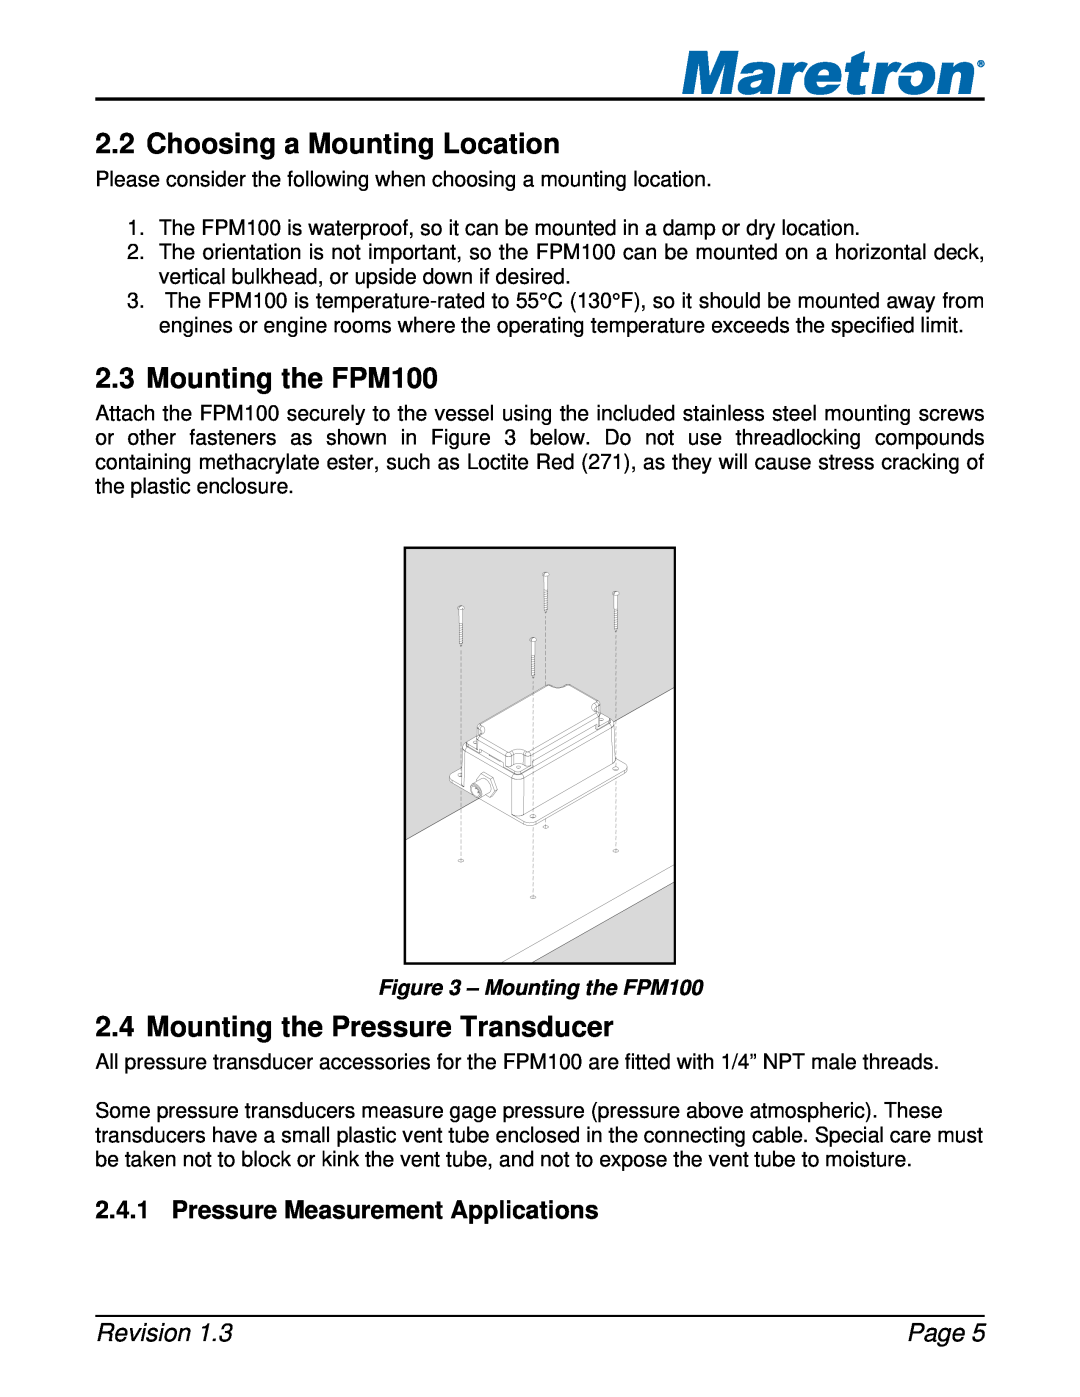 Maretron user manual Choosing a Mounting Location, Mounting the FPM100, Mounting the Pressure Transducer, Revision, Page 